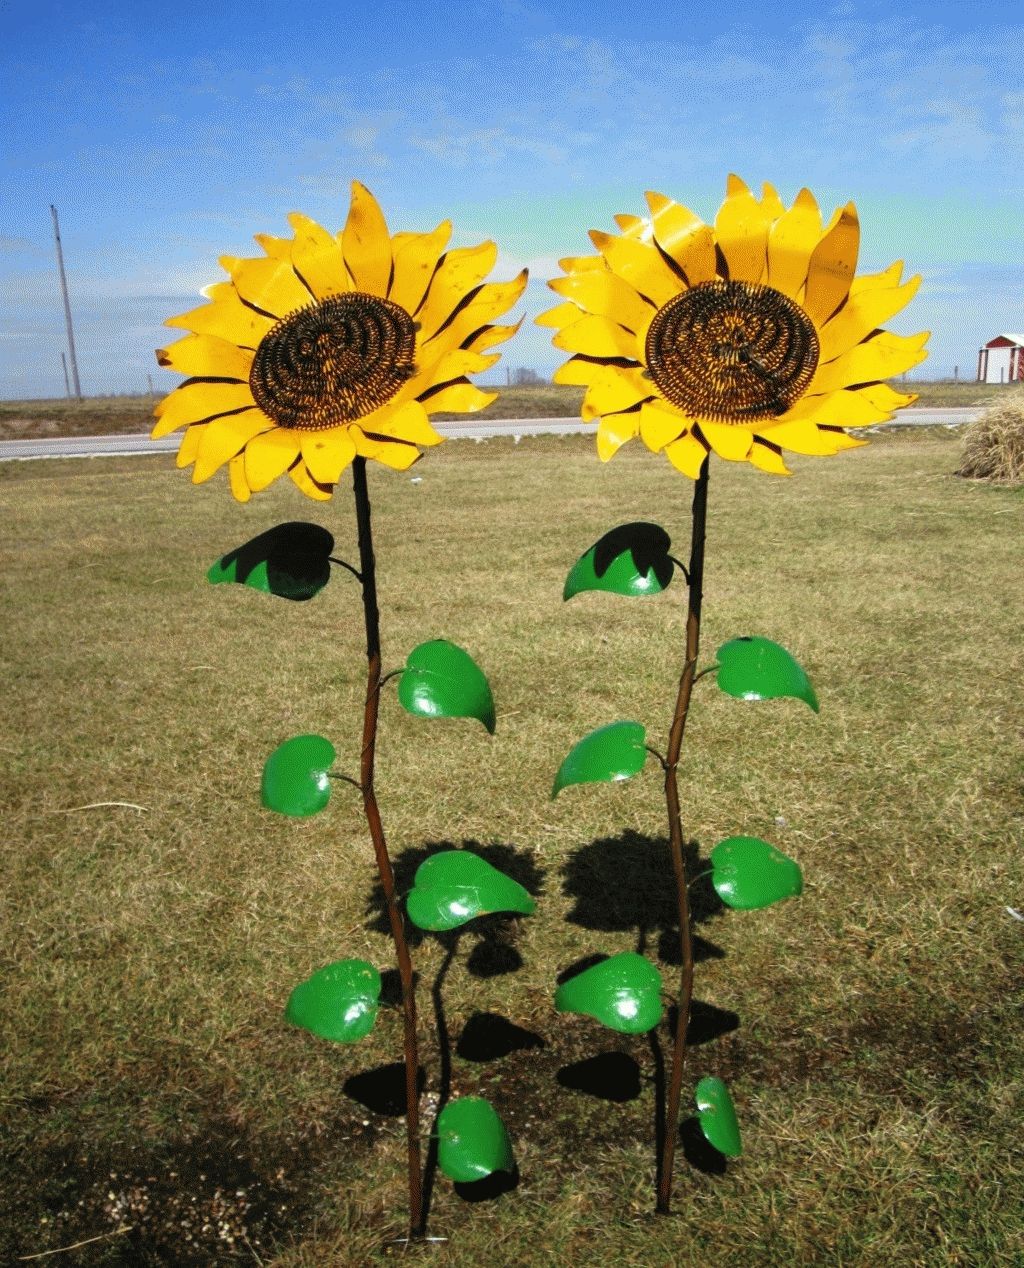 67" Recycled Metal Giant Sunflower Stake – Yard Decor With Regard To Most Recently Released Metal Sunflower Yard Art (View 1 of 15)